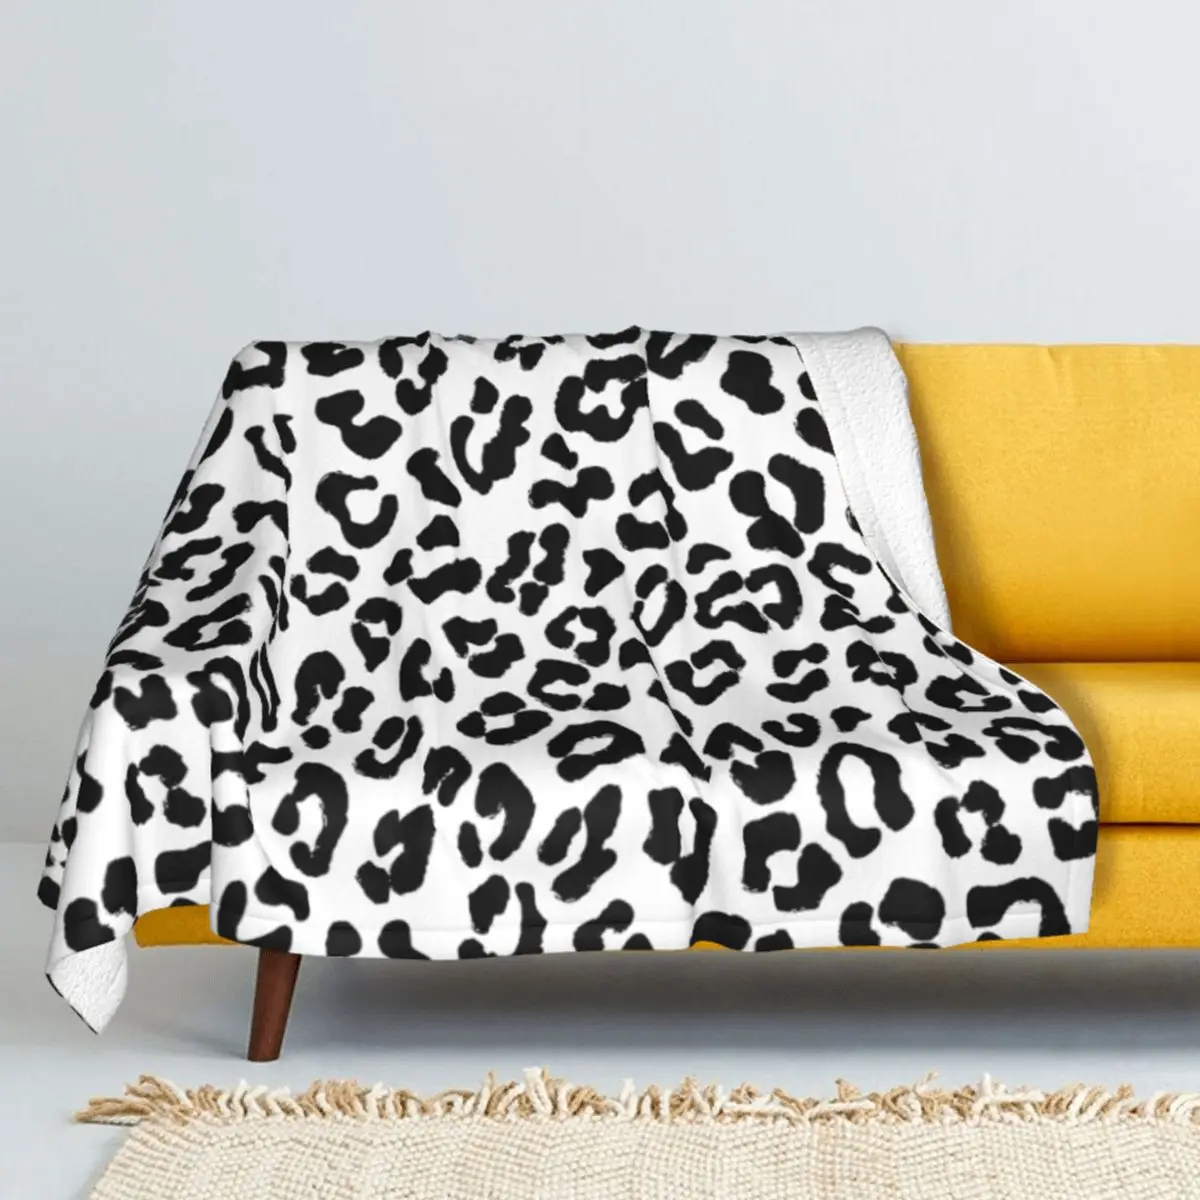 

Leopard-print-with-black White Winter Thicken Cashmere blankets Lamb Blanket Coral fleece Throw blanket warmth bedclothes Sofa